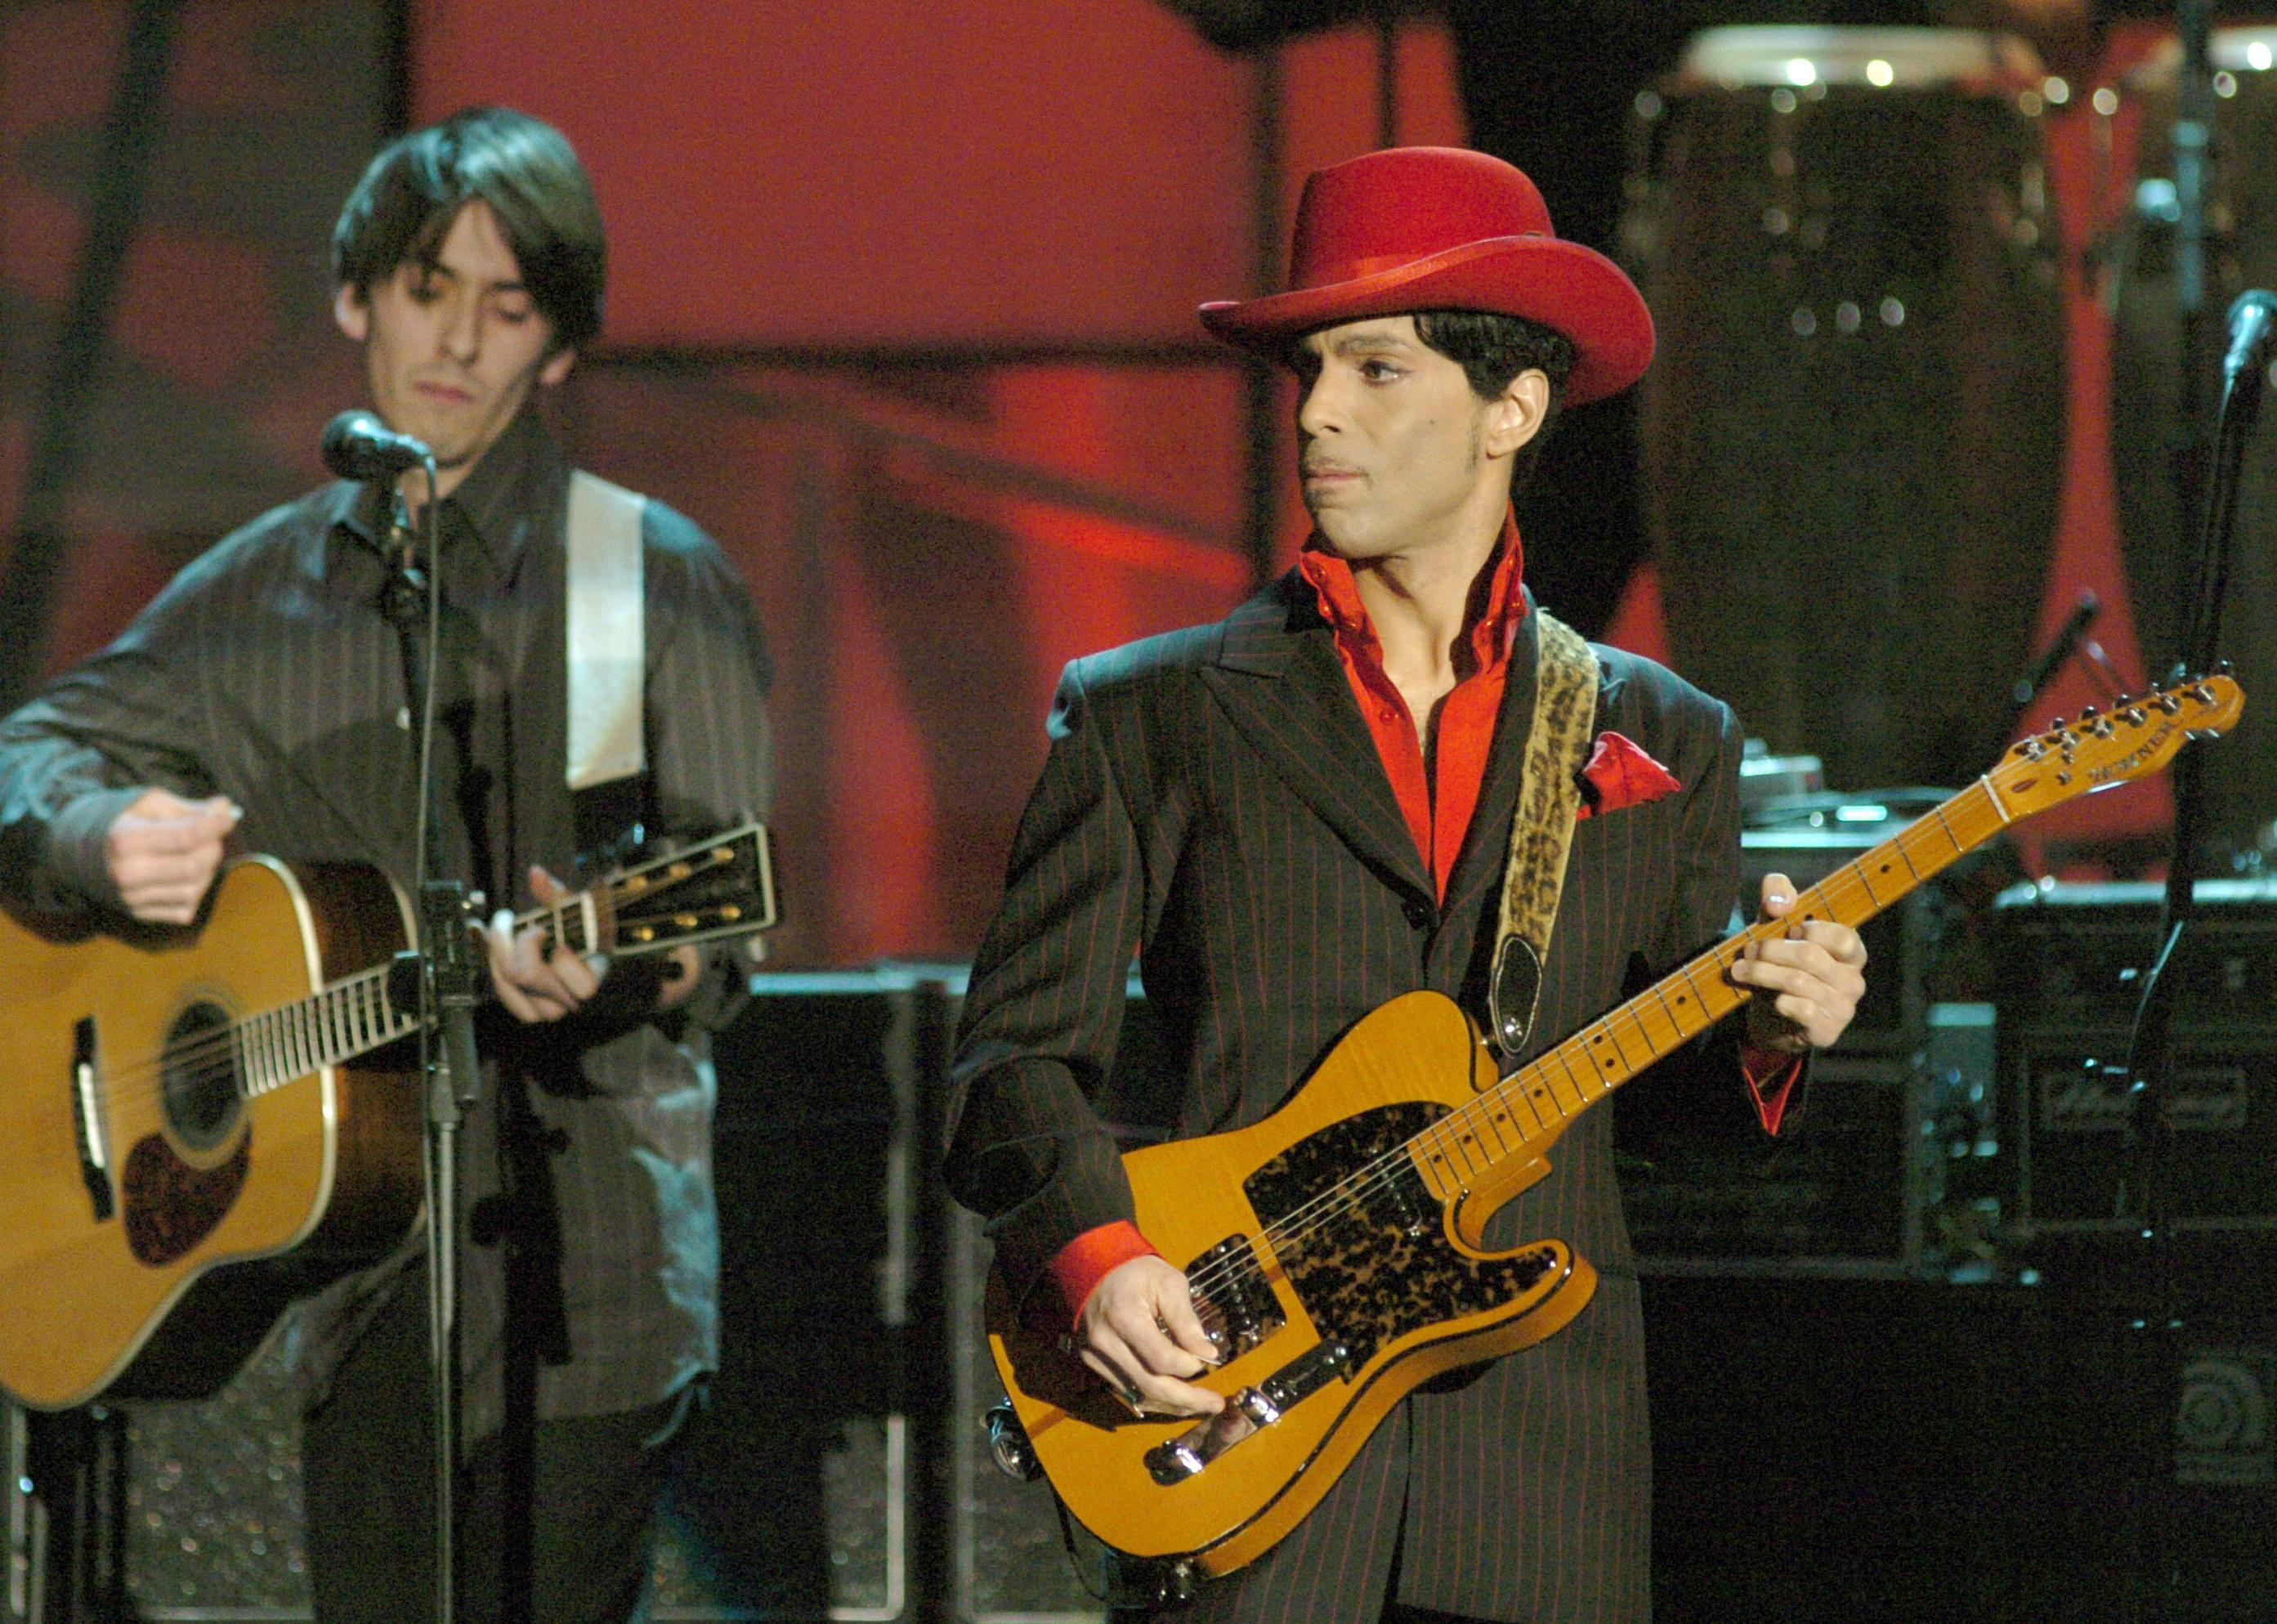 Dhani Harrison and Prince during the 19th Annual Rock & Roll Hall of Fame induction ceremony.